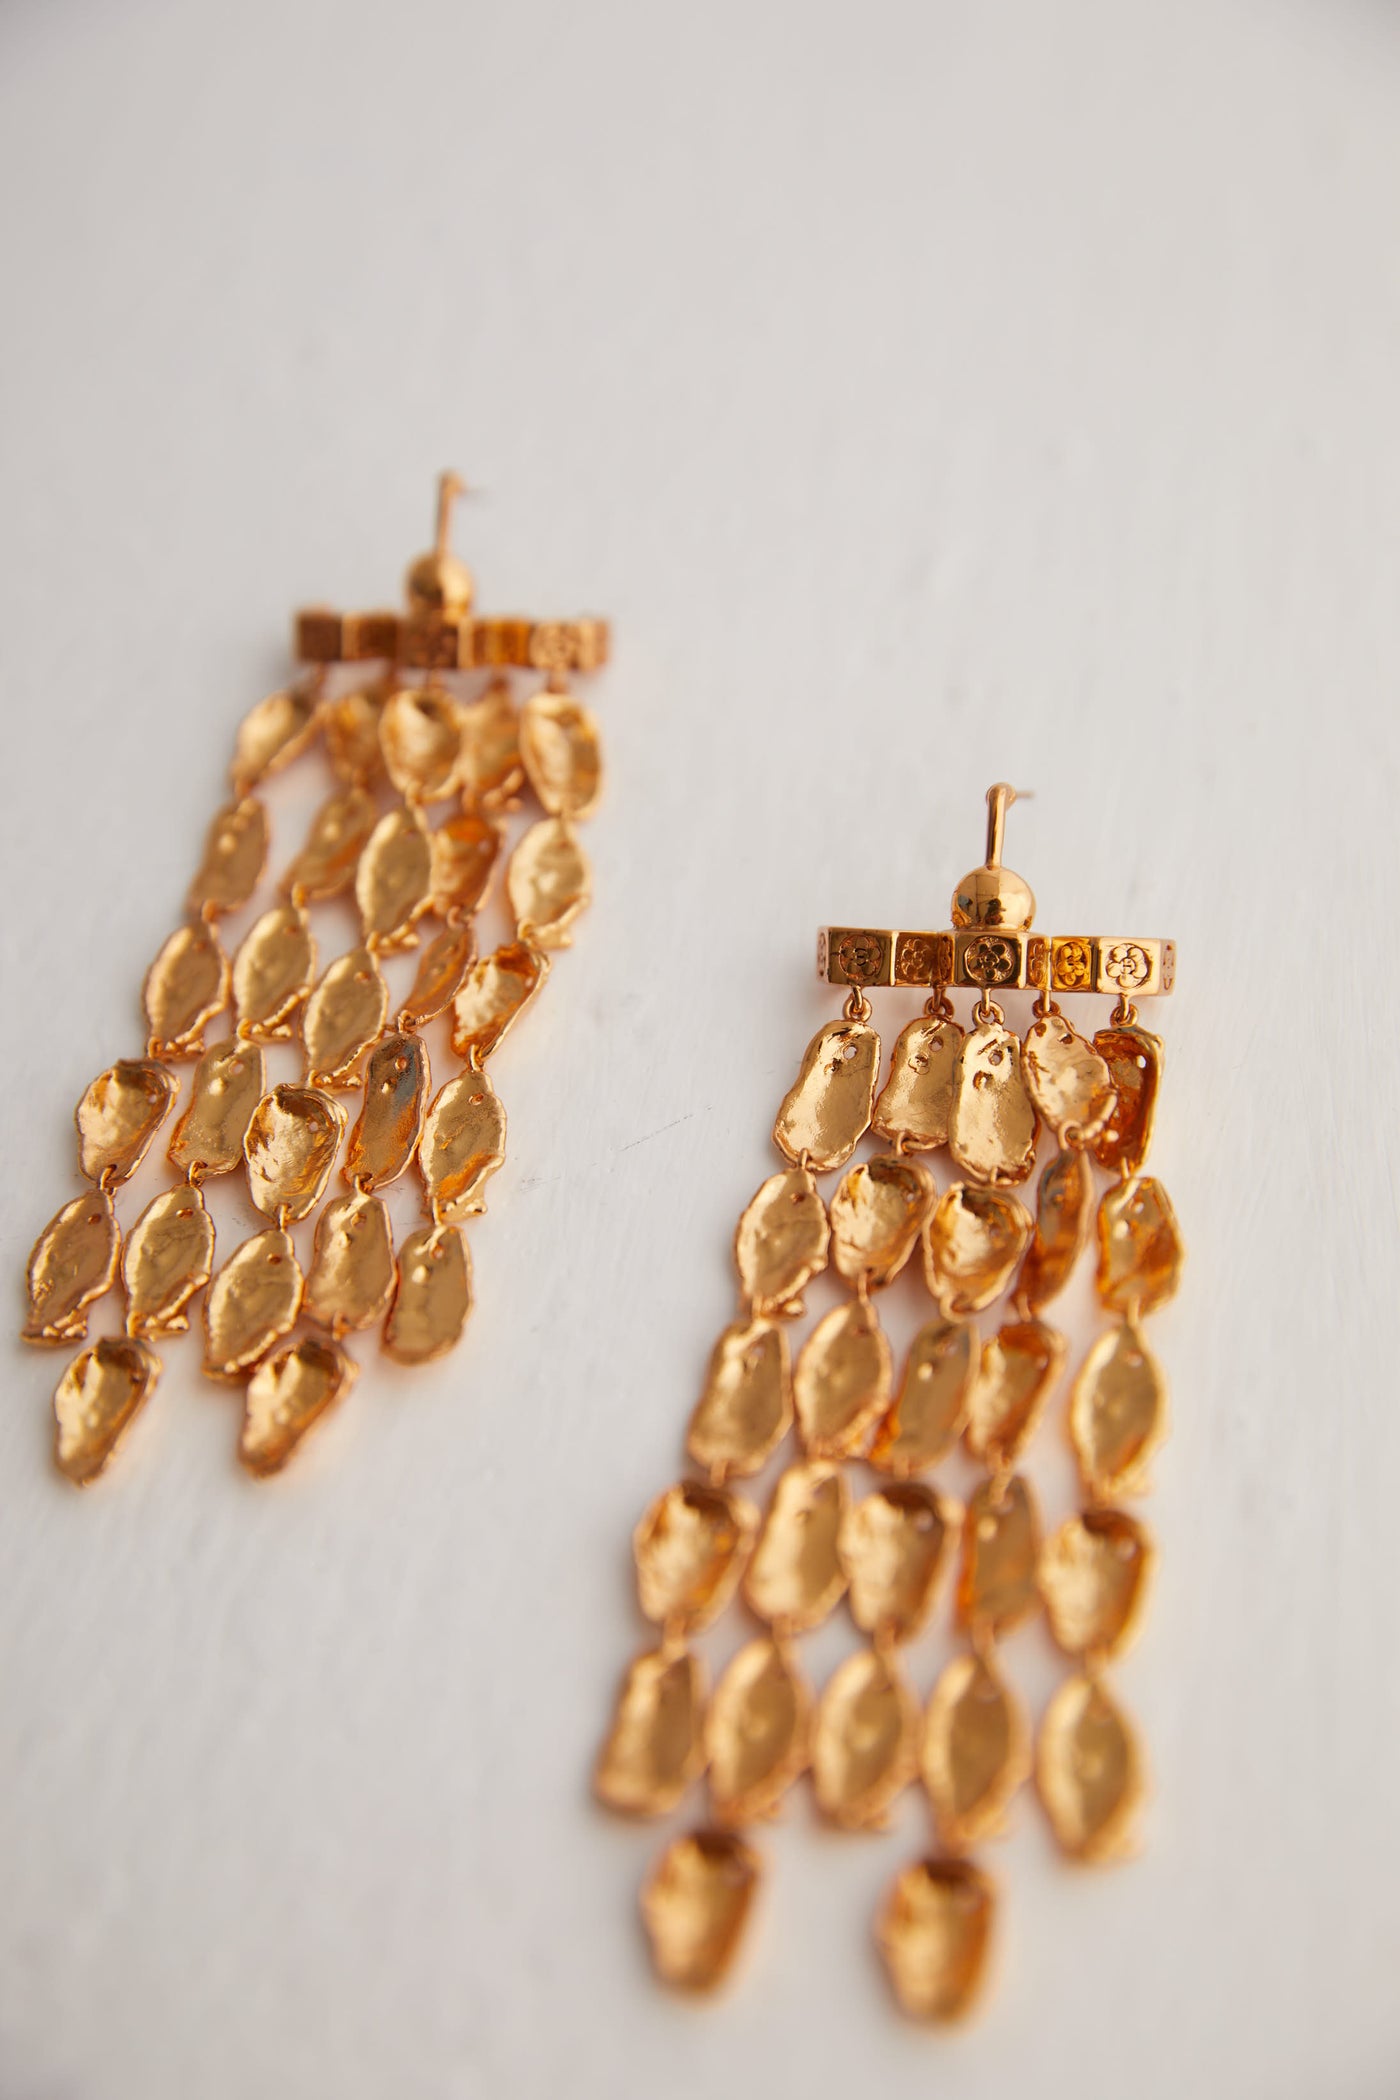 Outhouse jewellery OH Poppi Dewdrop Statement Earrings gold online shopping melange singapore indian designer wear